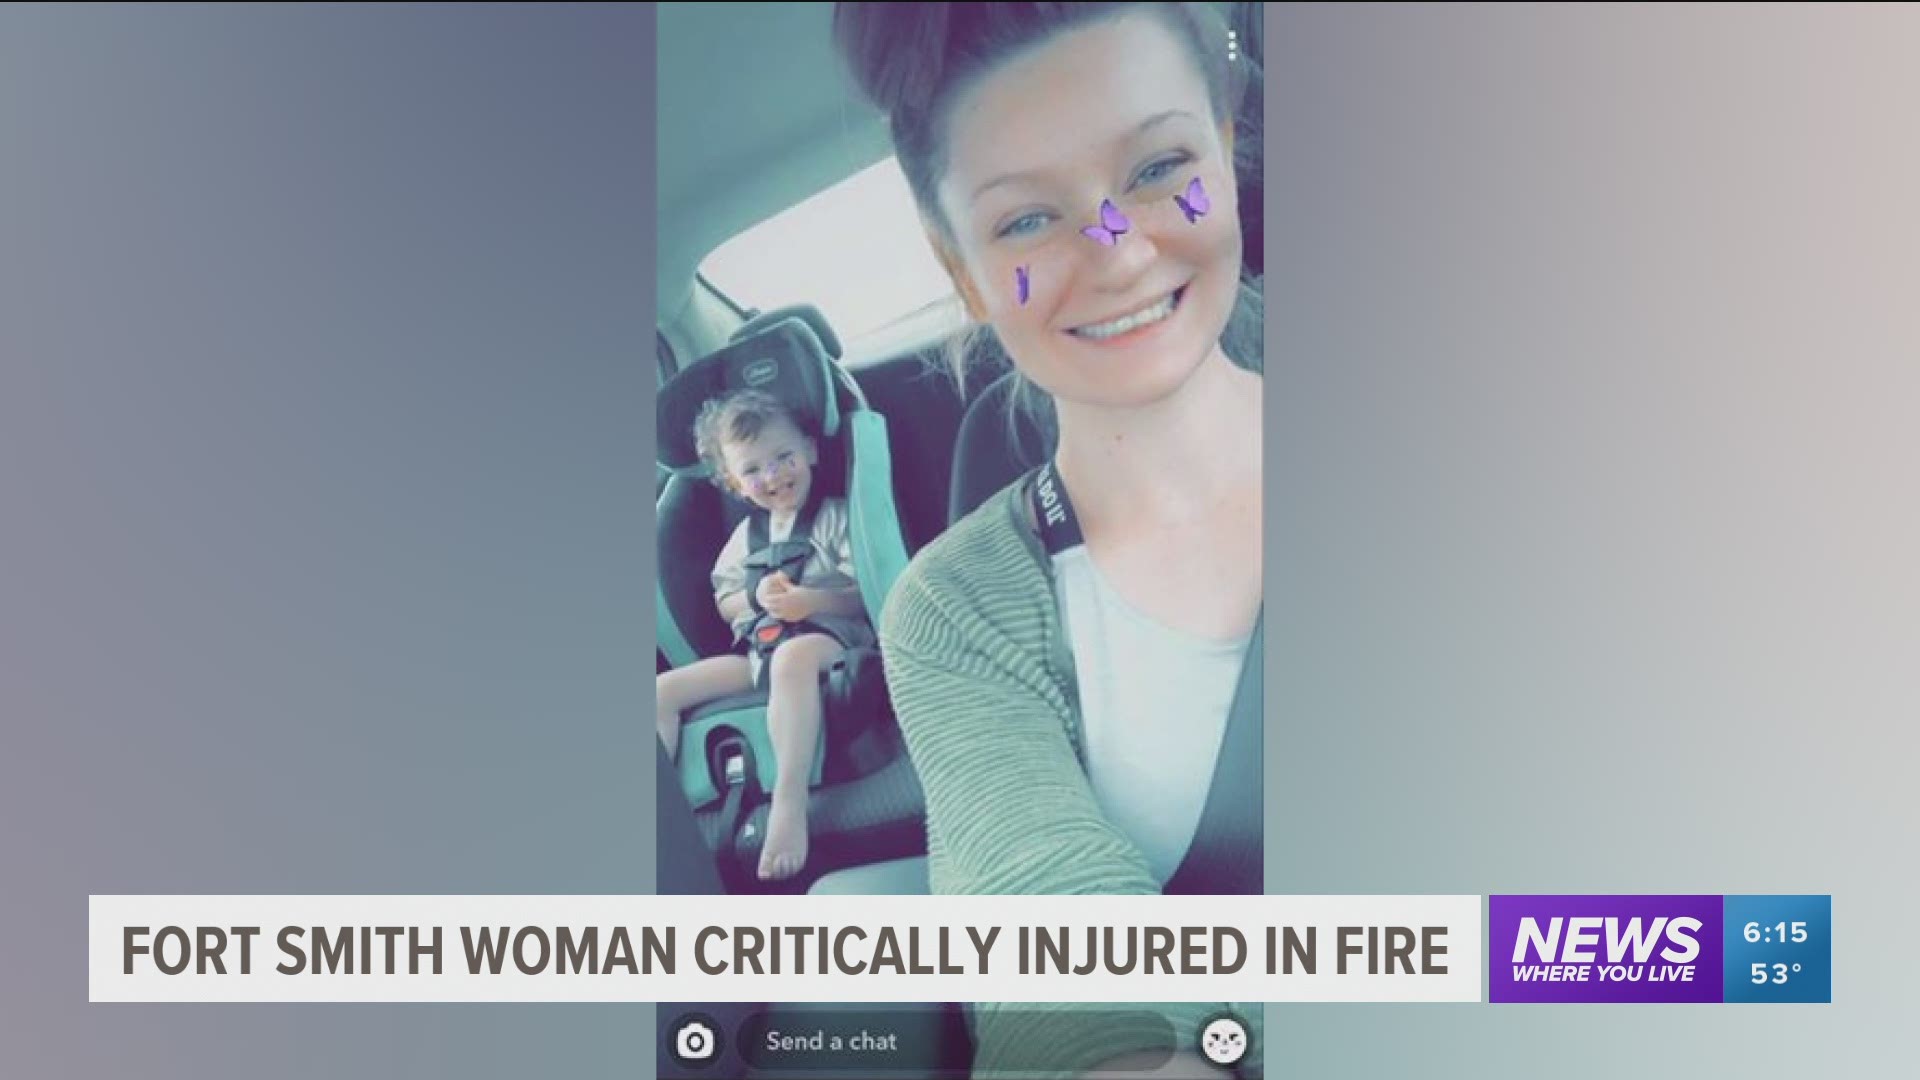 Fort Smith woman critically injured in fire